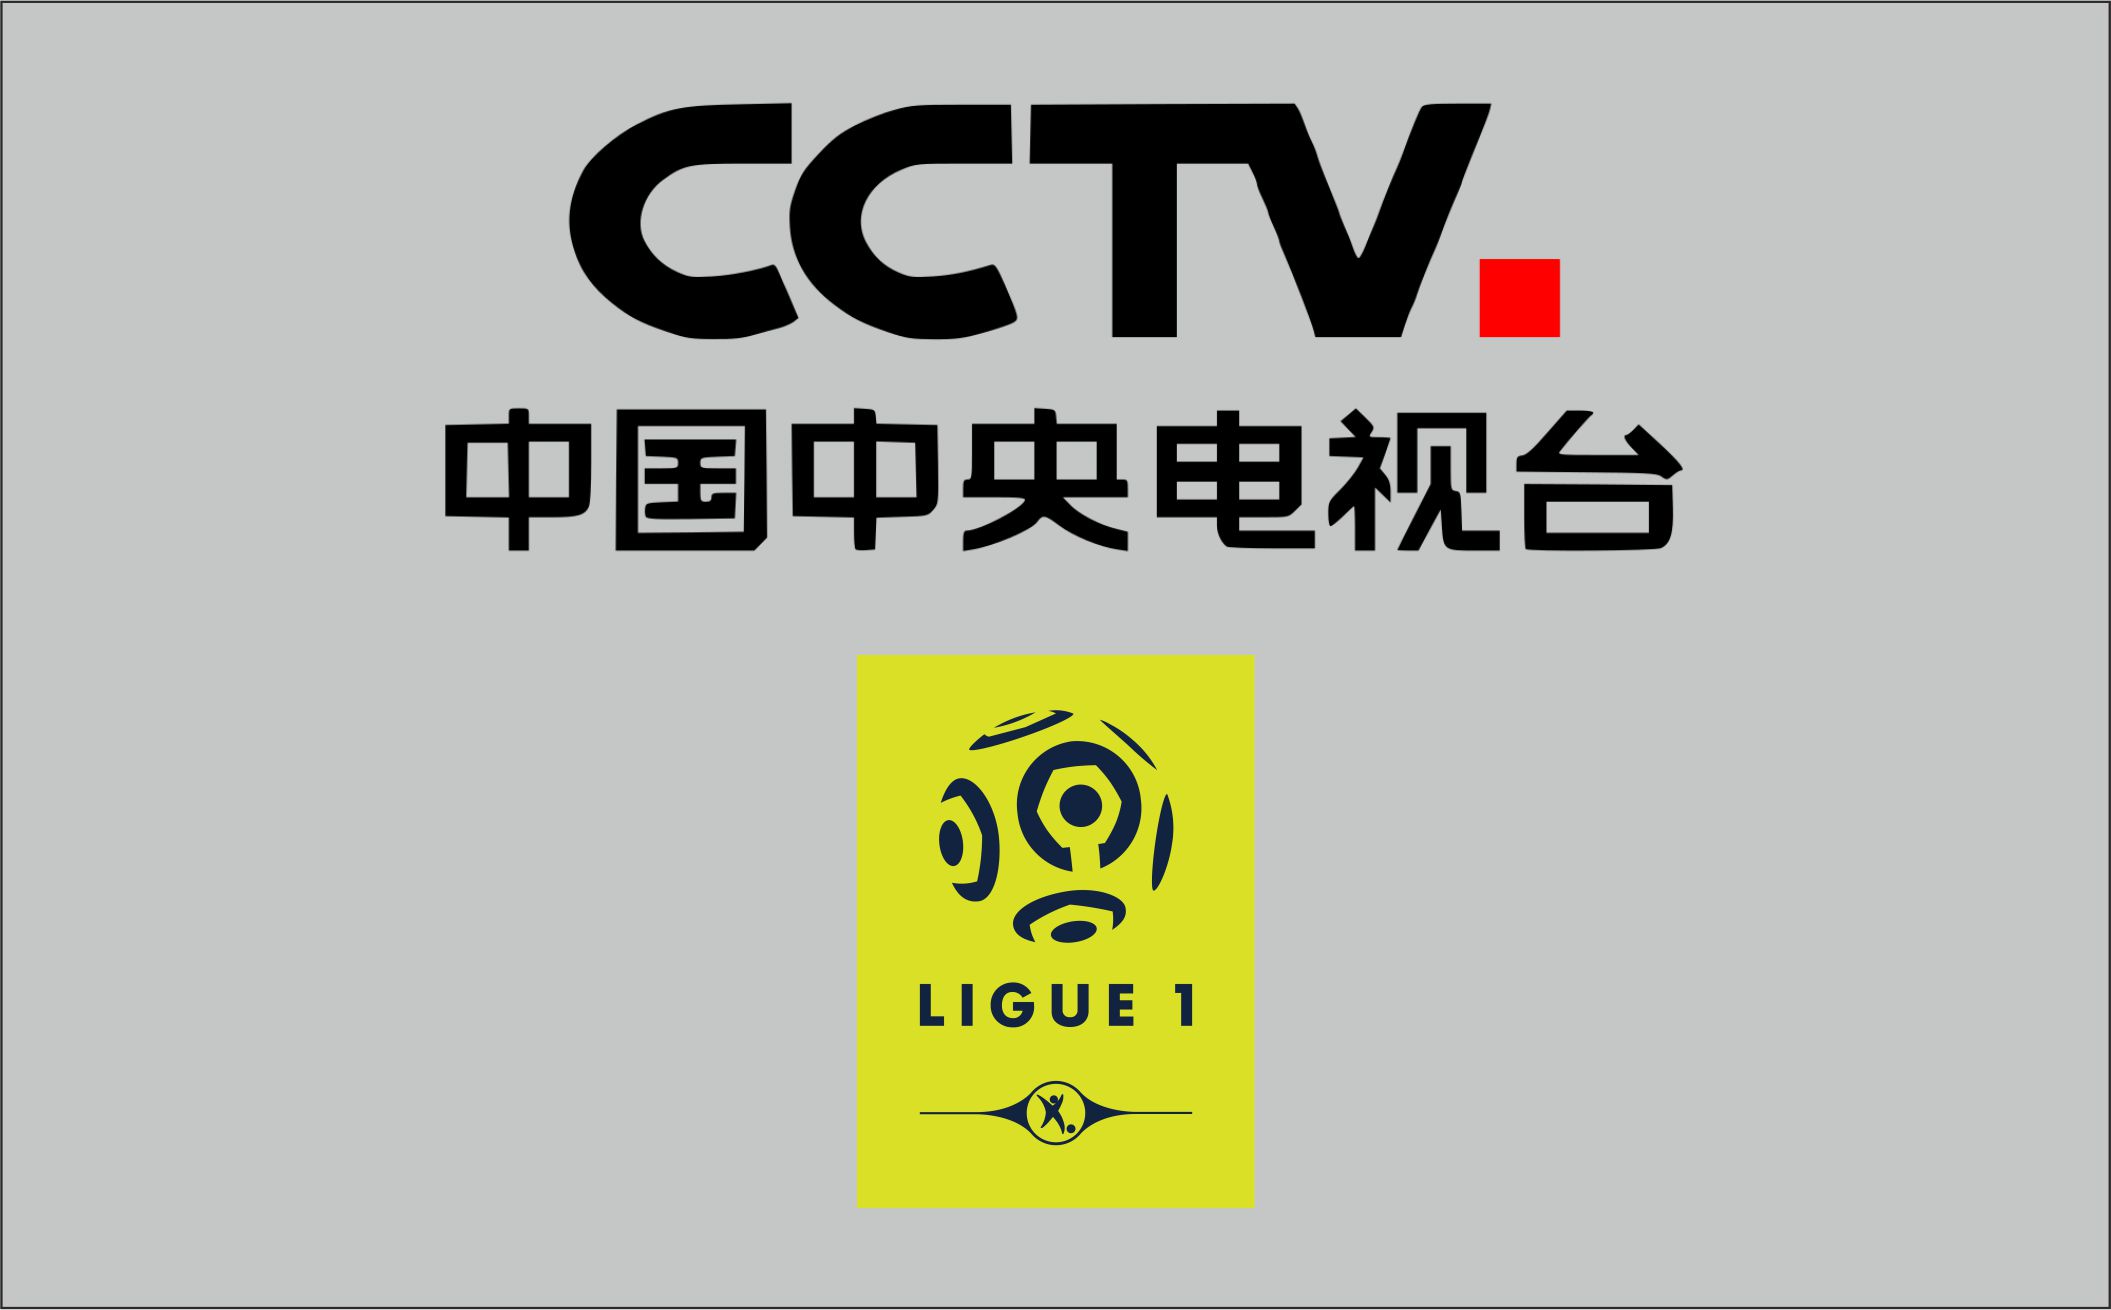 France Ligue 1 broadcast live in china on cctv